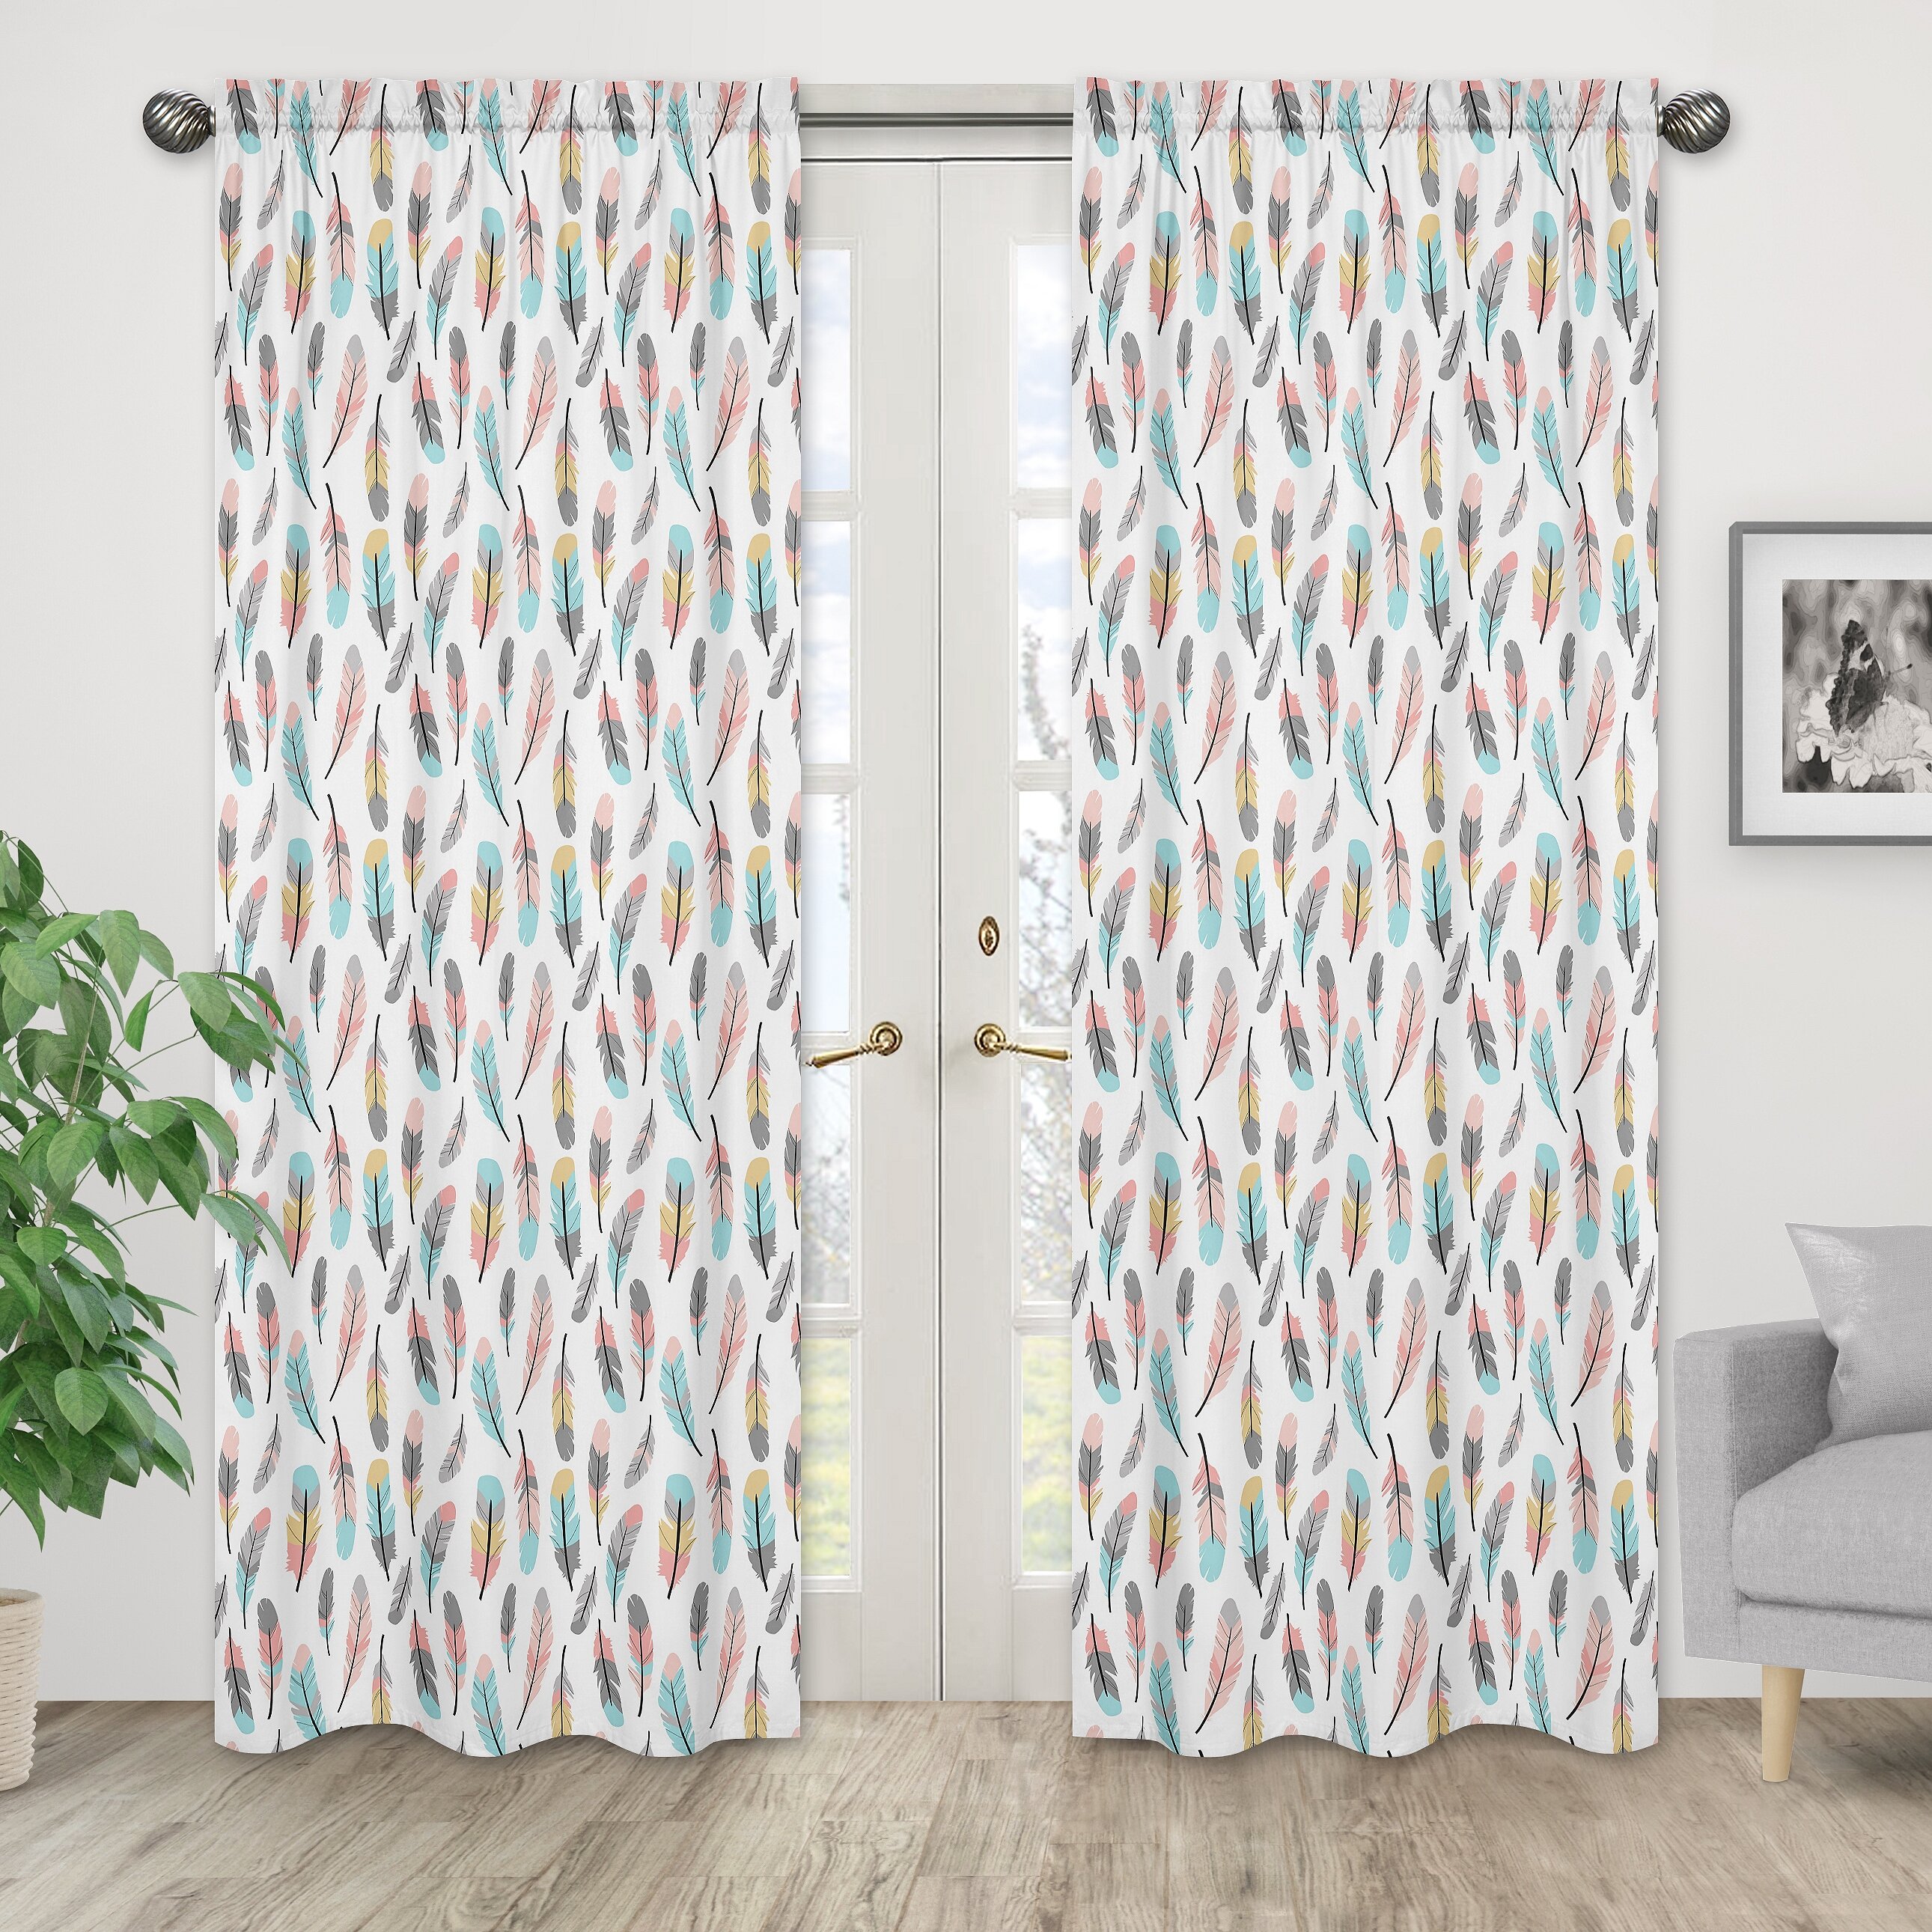 Set of 2 Sweet Jojo Designs Window Treatment Panels for Modern Turquoise and Coral Emma Collection